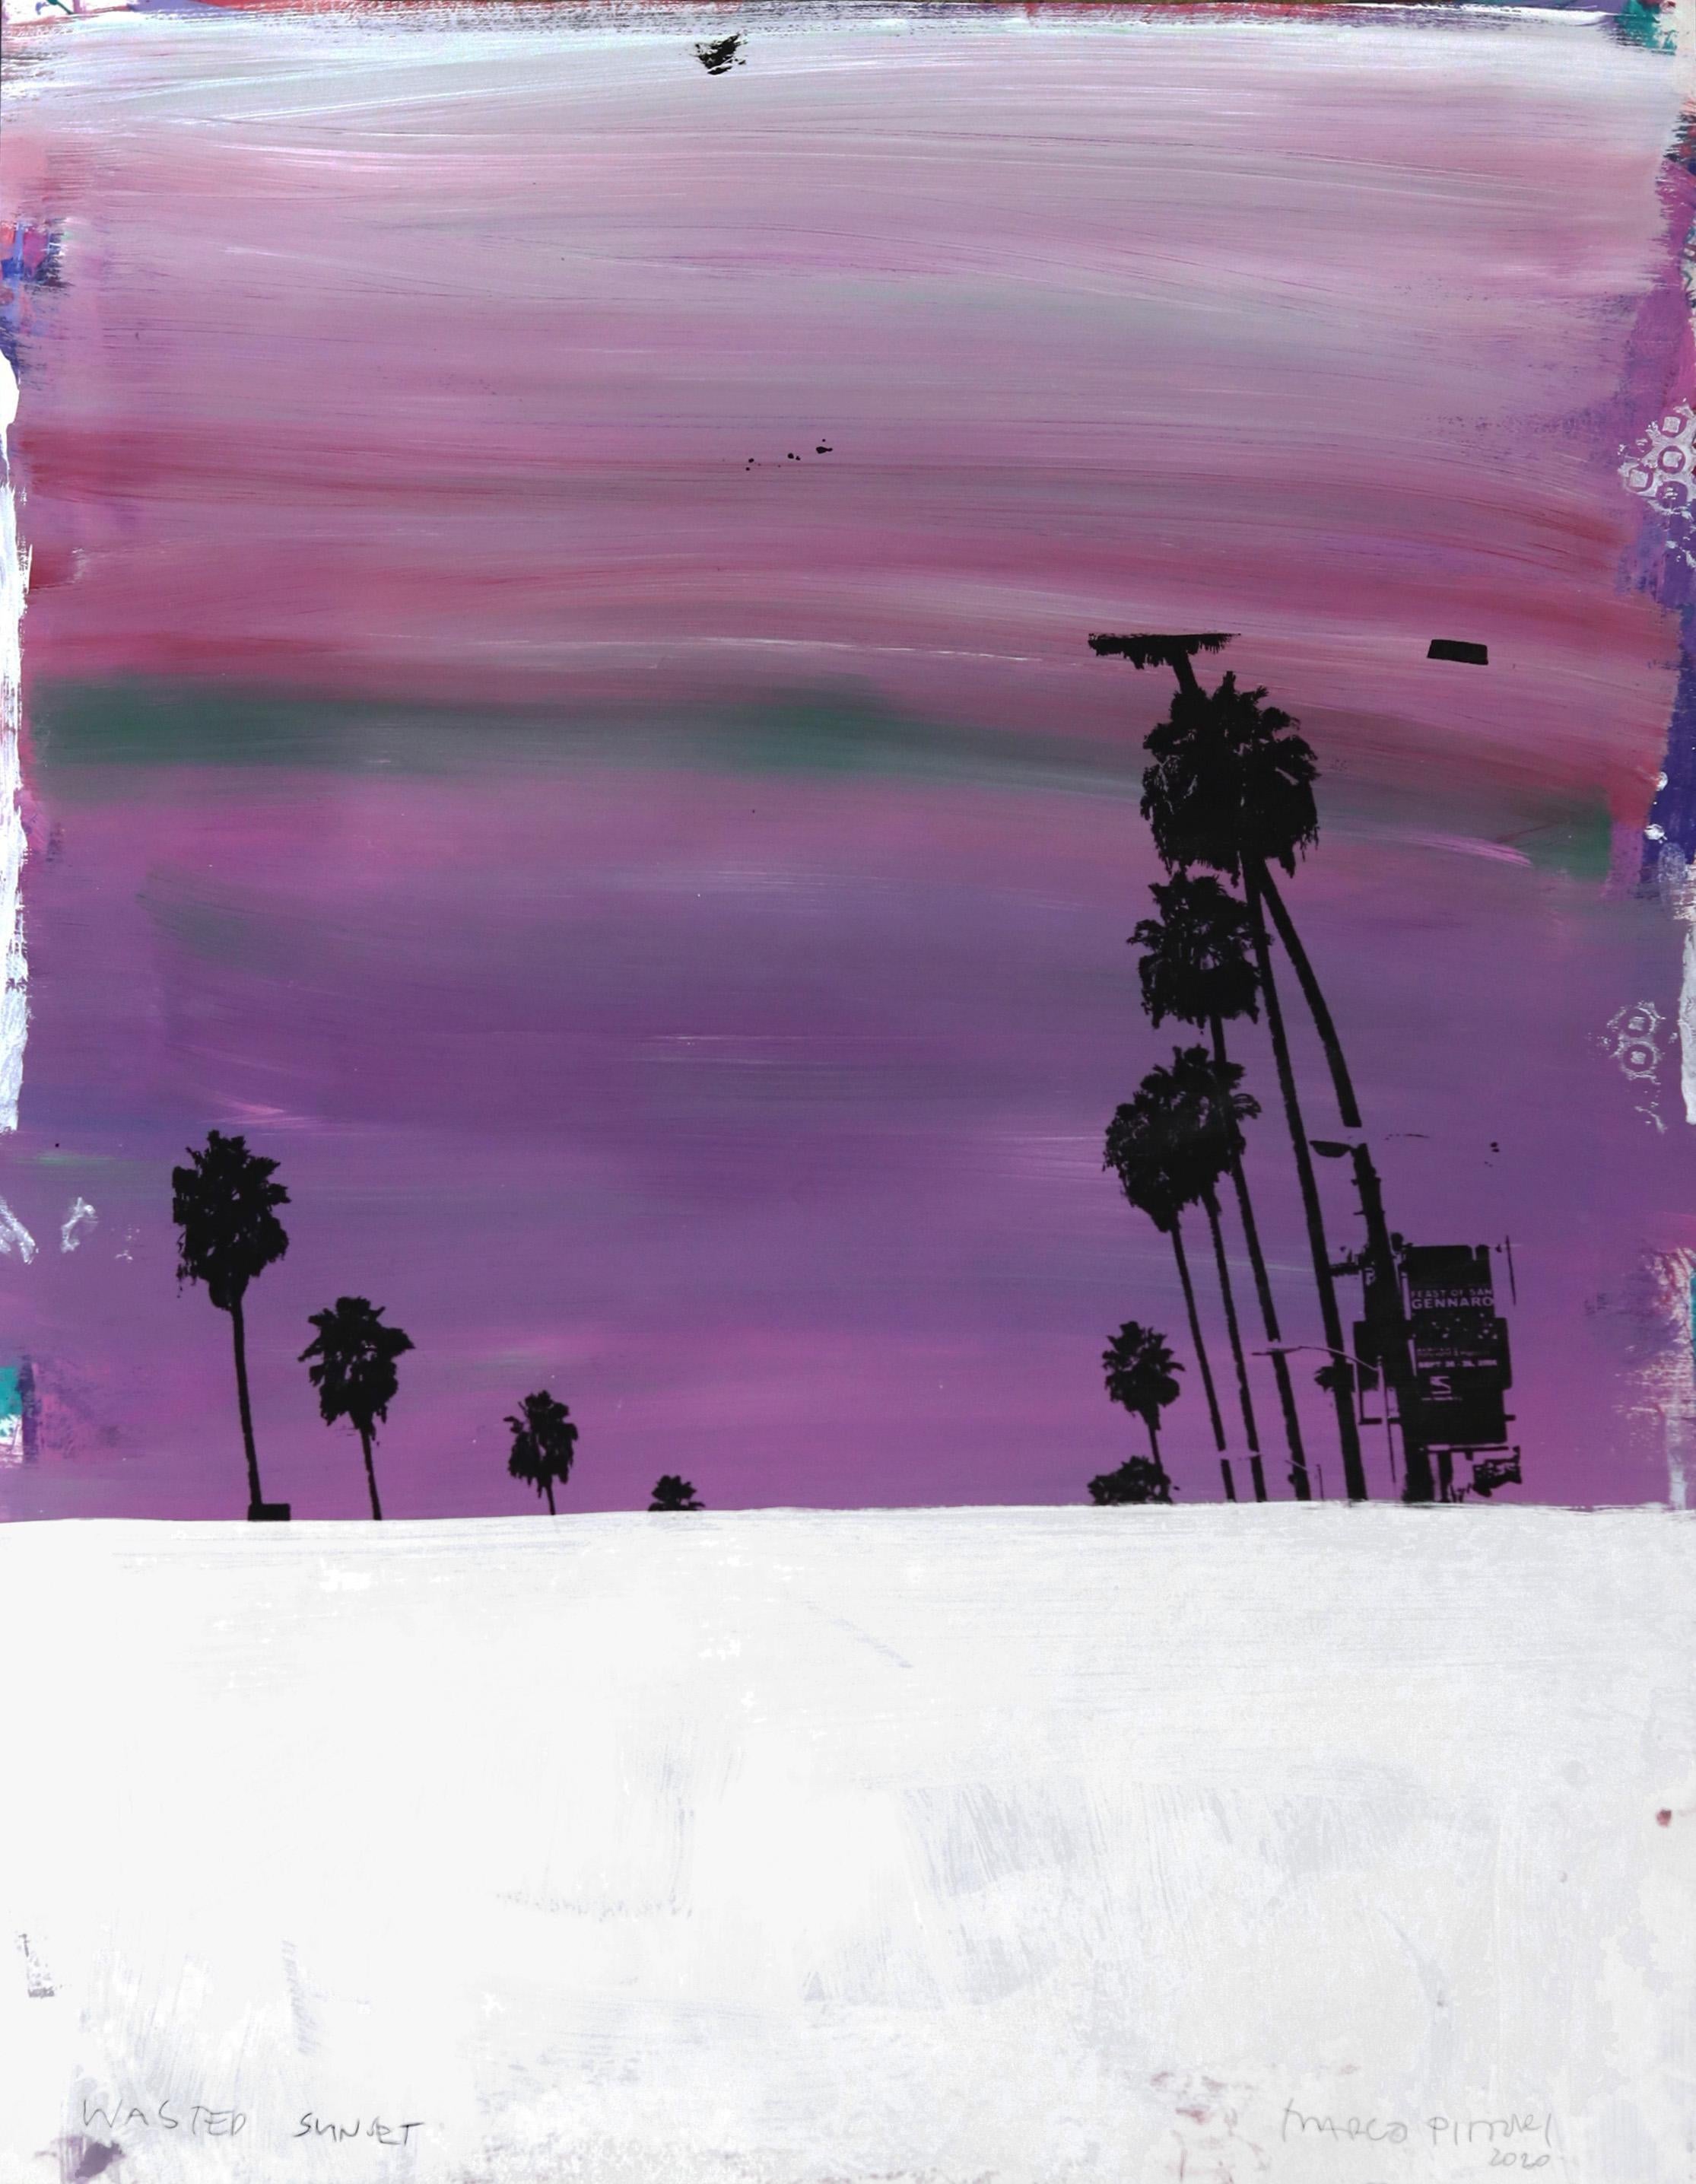 Marco Pittori Figurative Photograph - Wasted Sunset Smoggy Purple - Vibrant Palm Tree Pop Photography Art